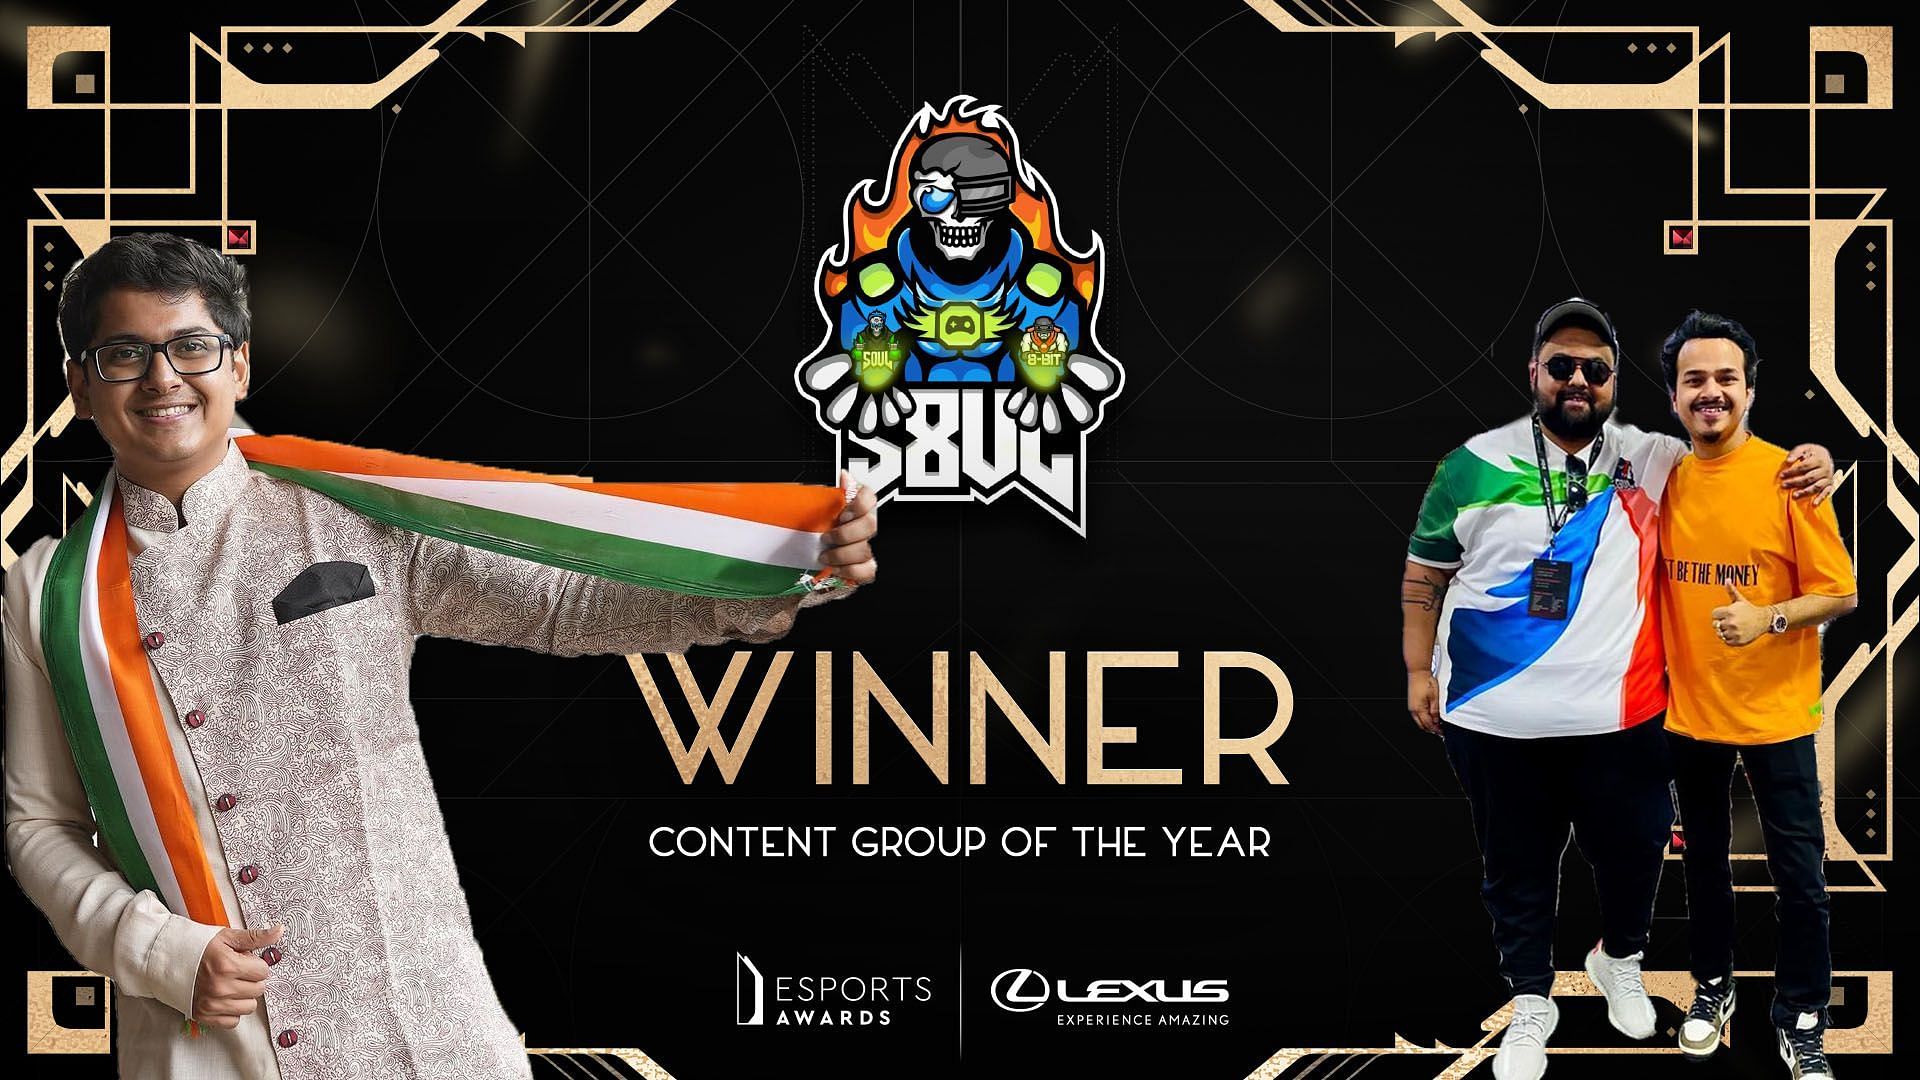 S8UL was named for Content Group of the Year at Esports Awards 2022 (Image via Esports Awards)